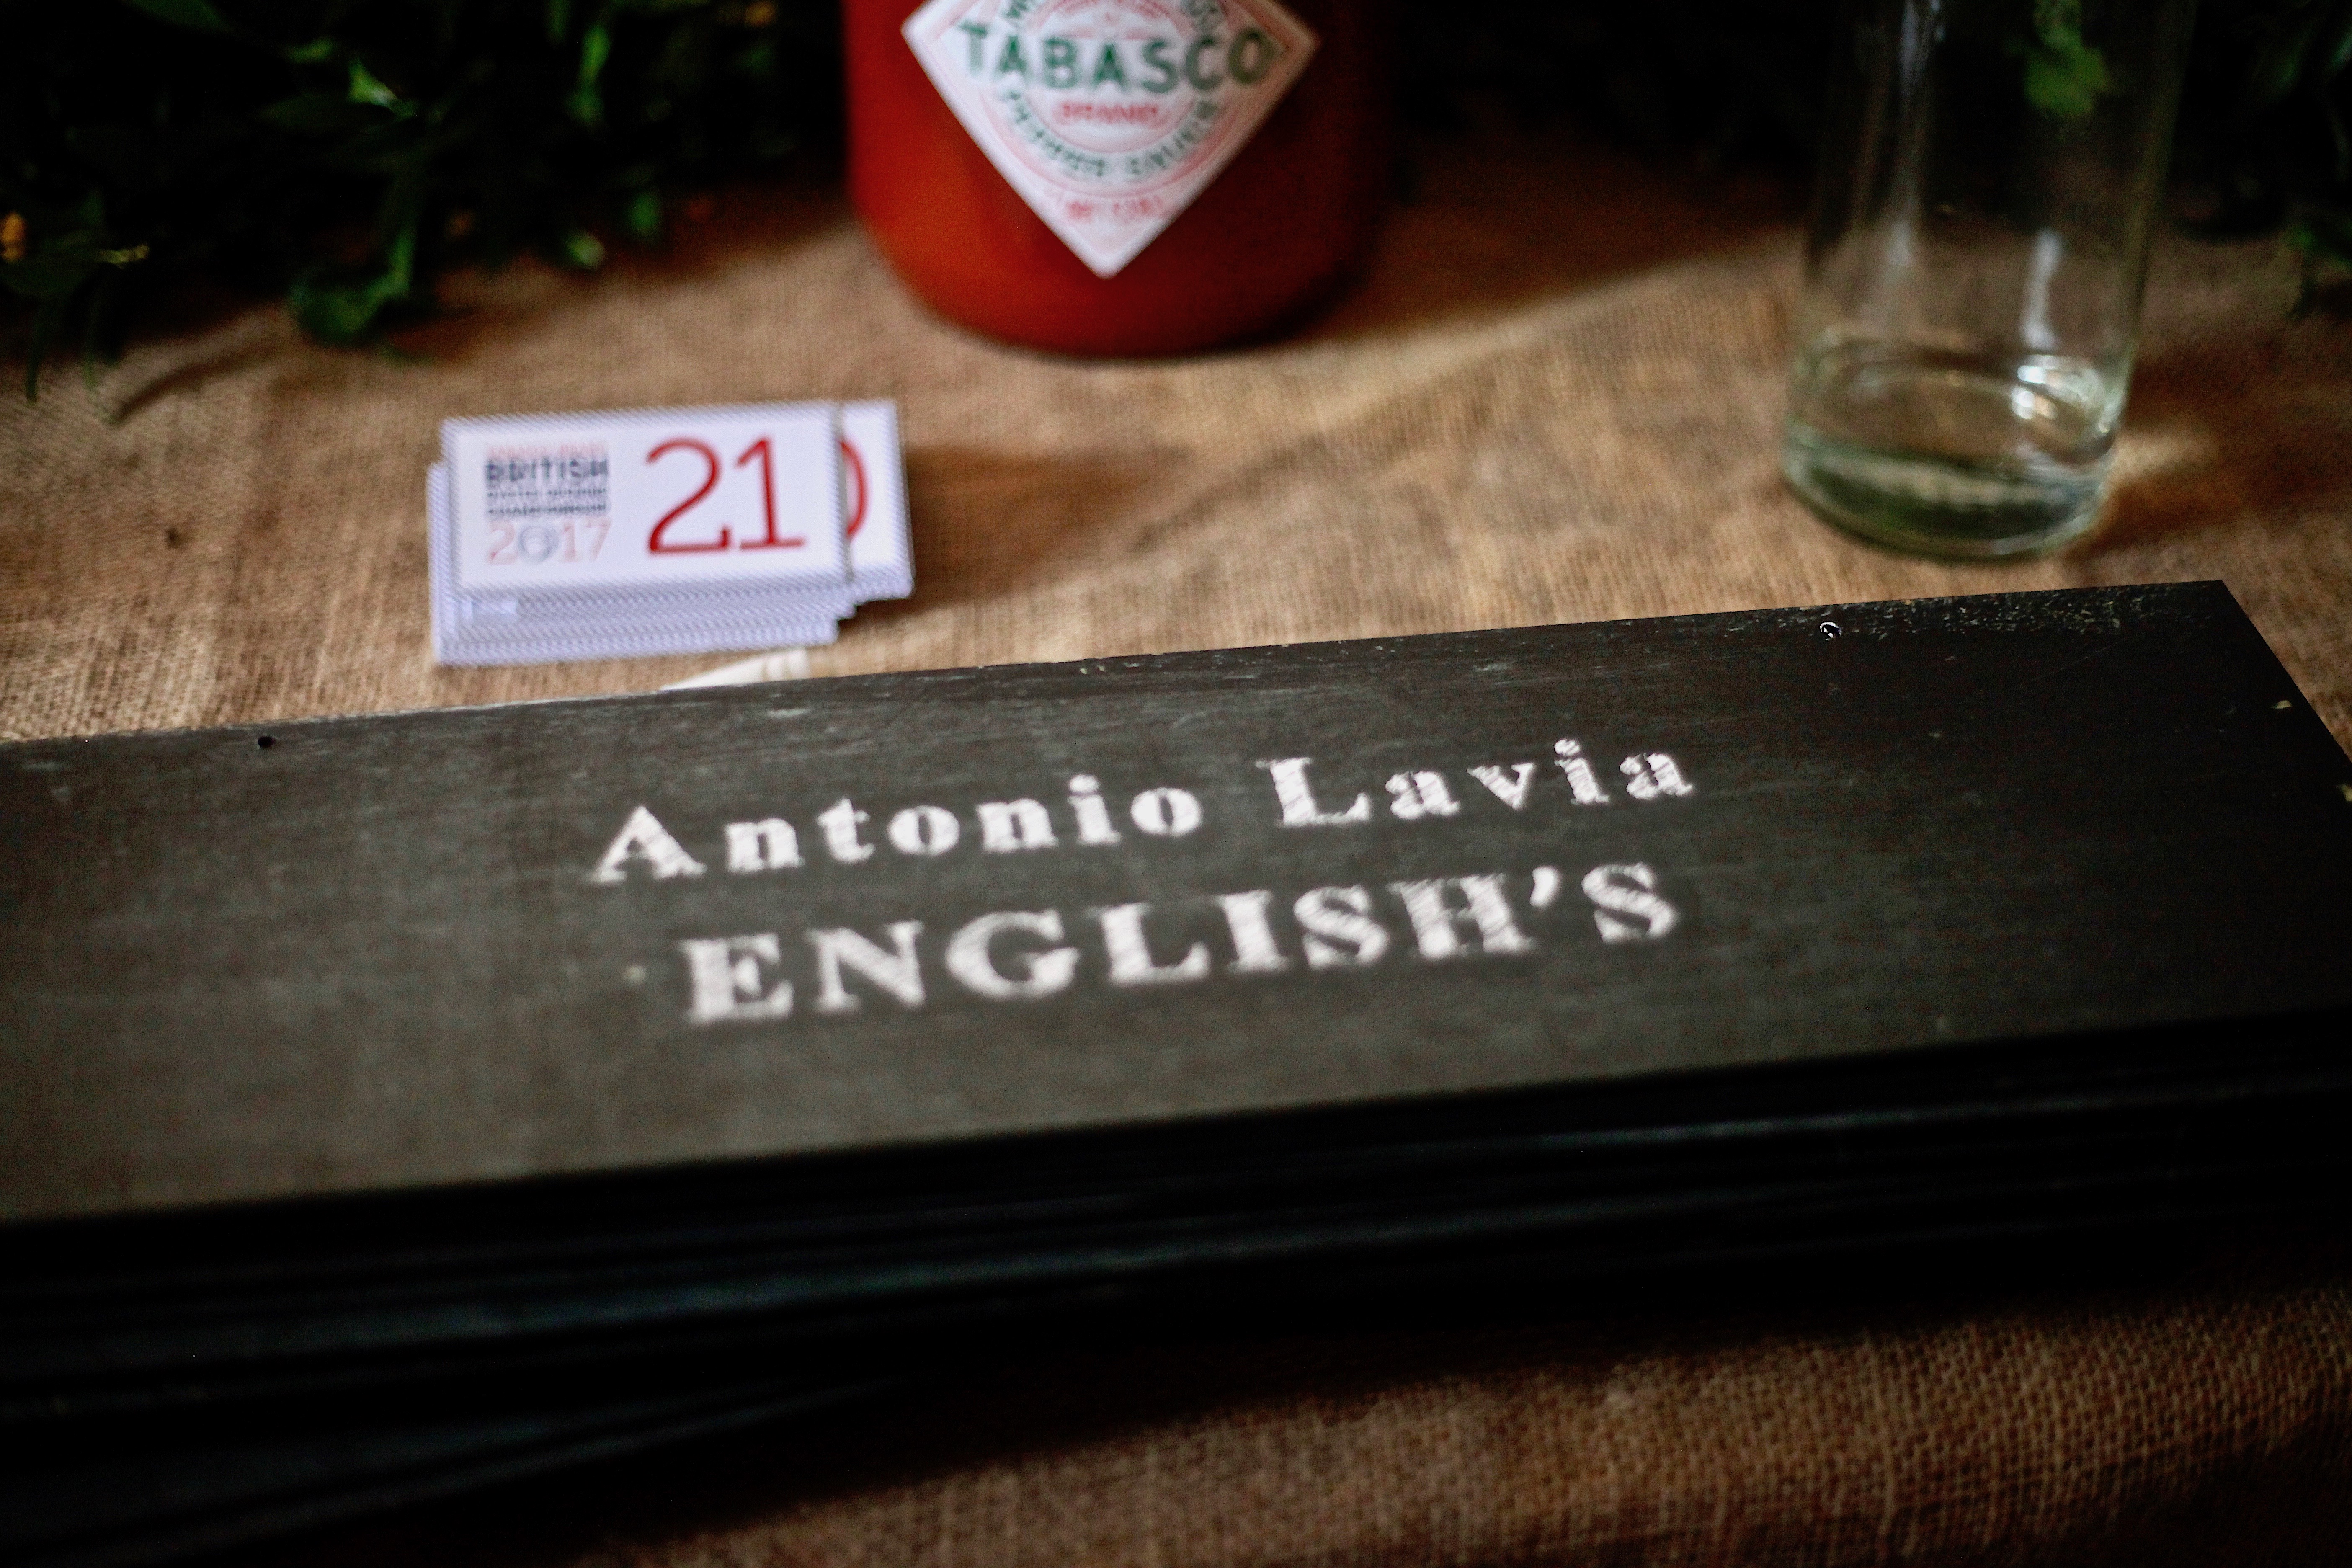 Antonio Lavia from English's sign, to be hung in front of his shucking station